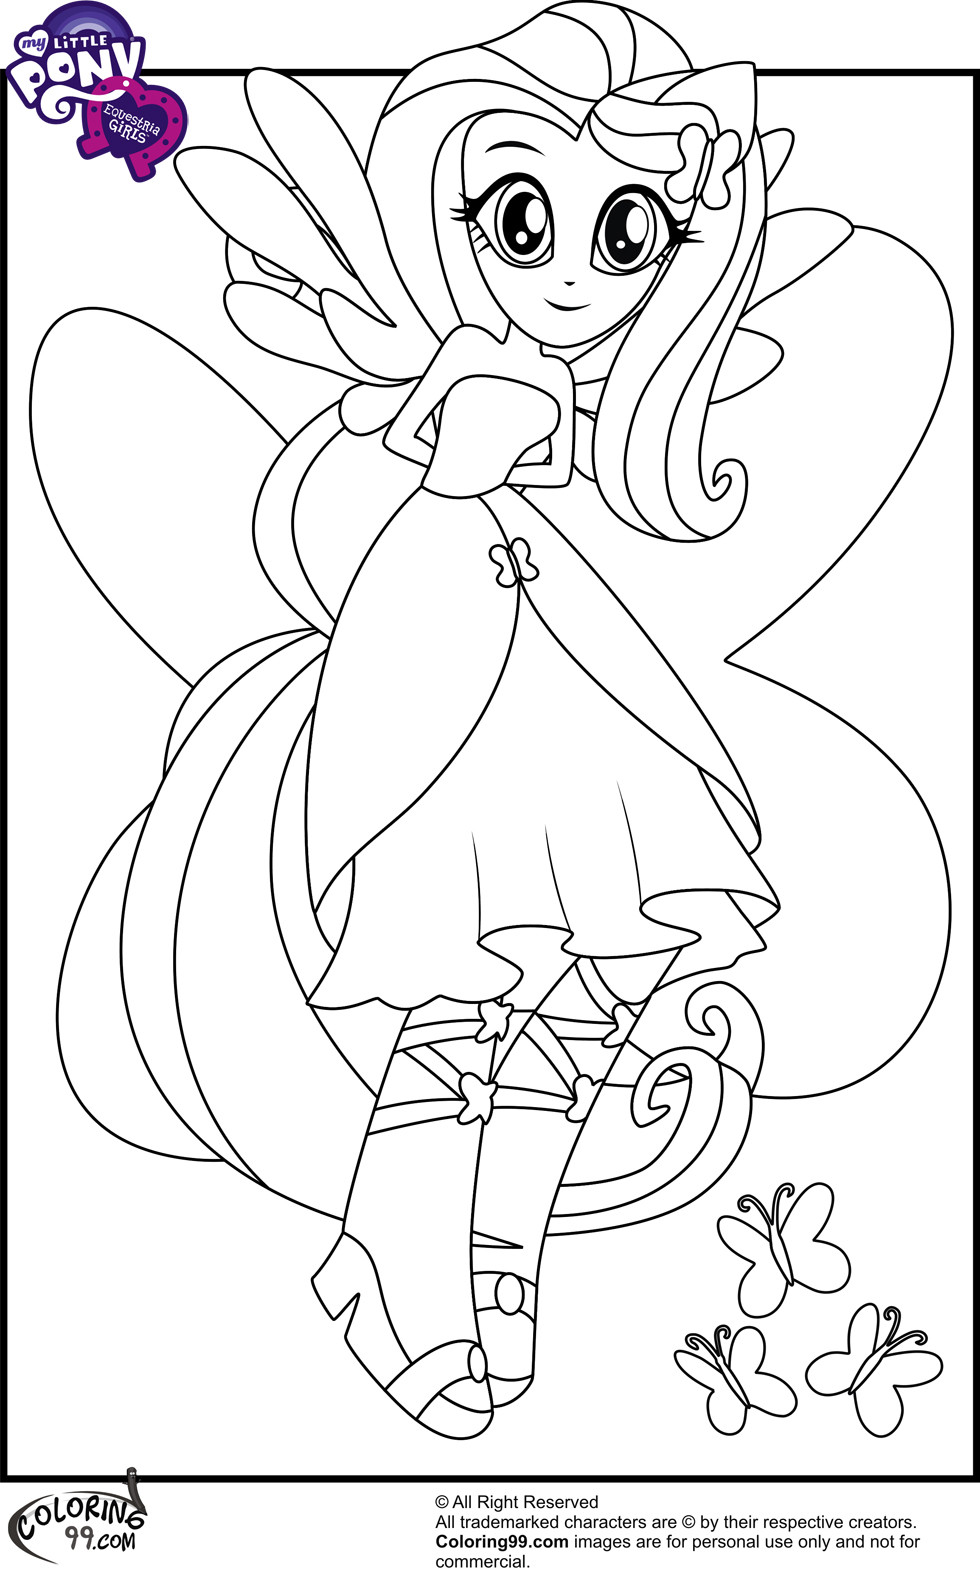 Equestria Girls Coloring Sheet
 My Little Pony Equestria Girls Coloring Pages